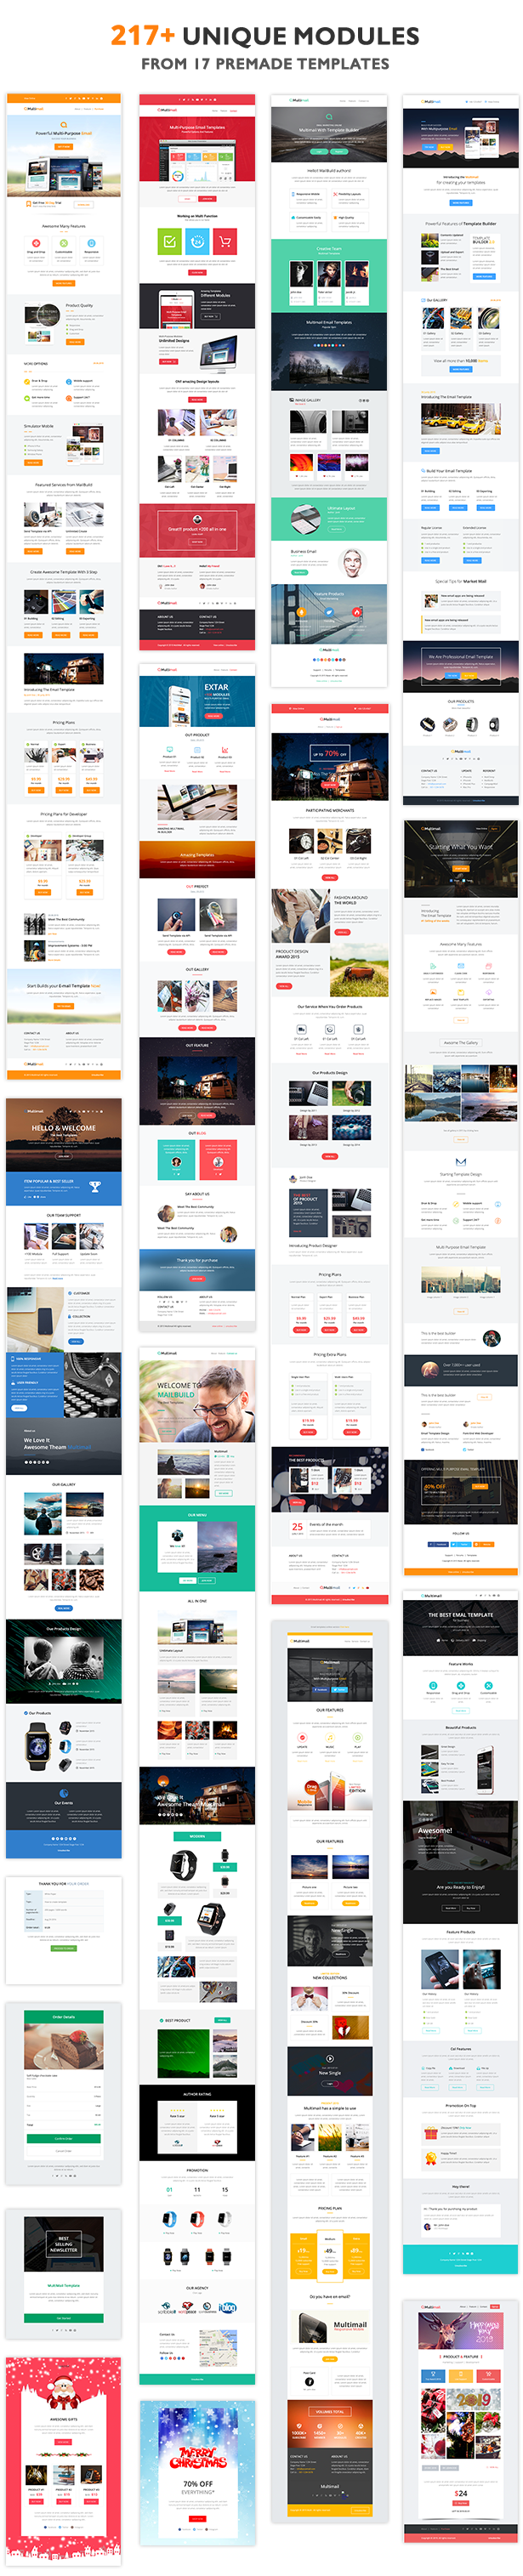 Multimail | Responsive Email Template Set + Builder Online - 4